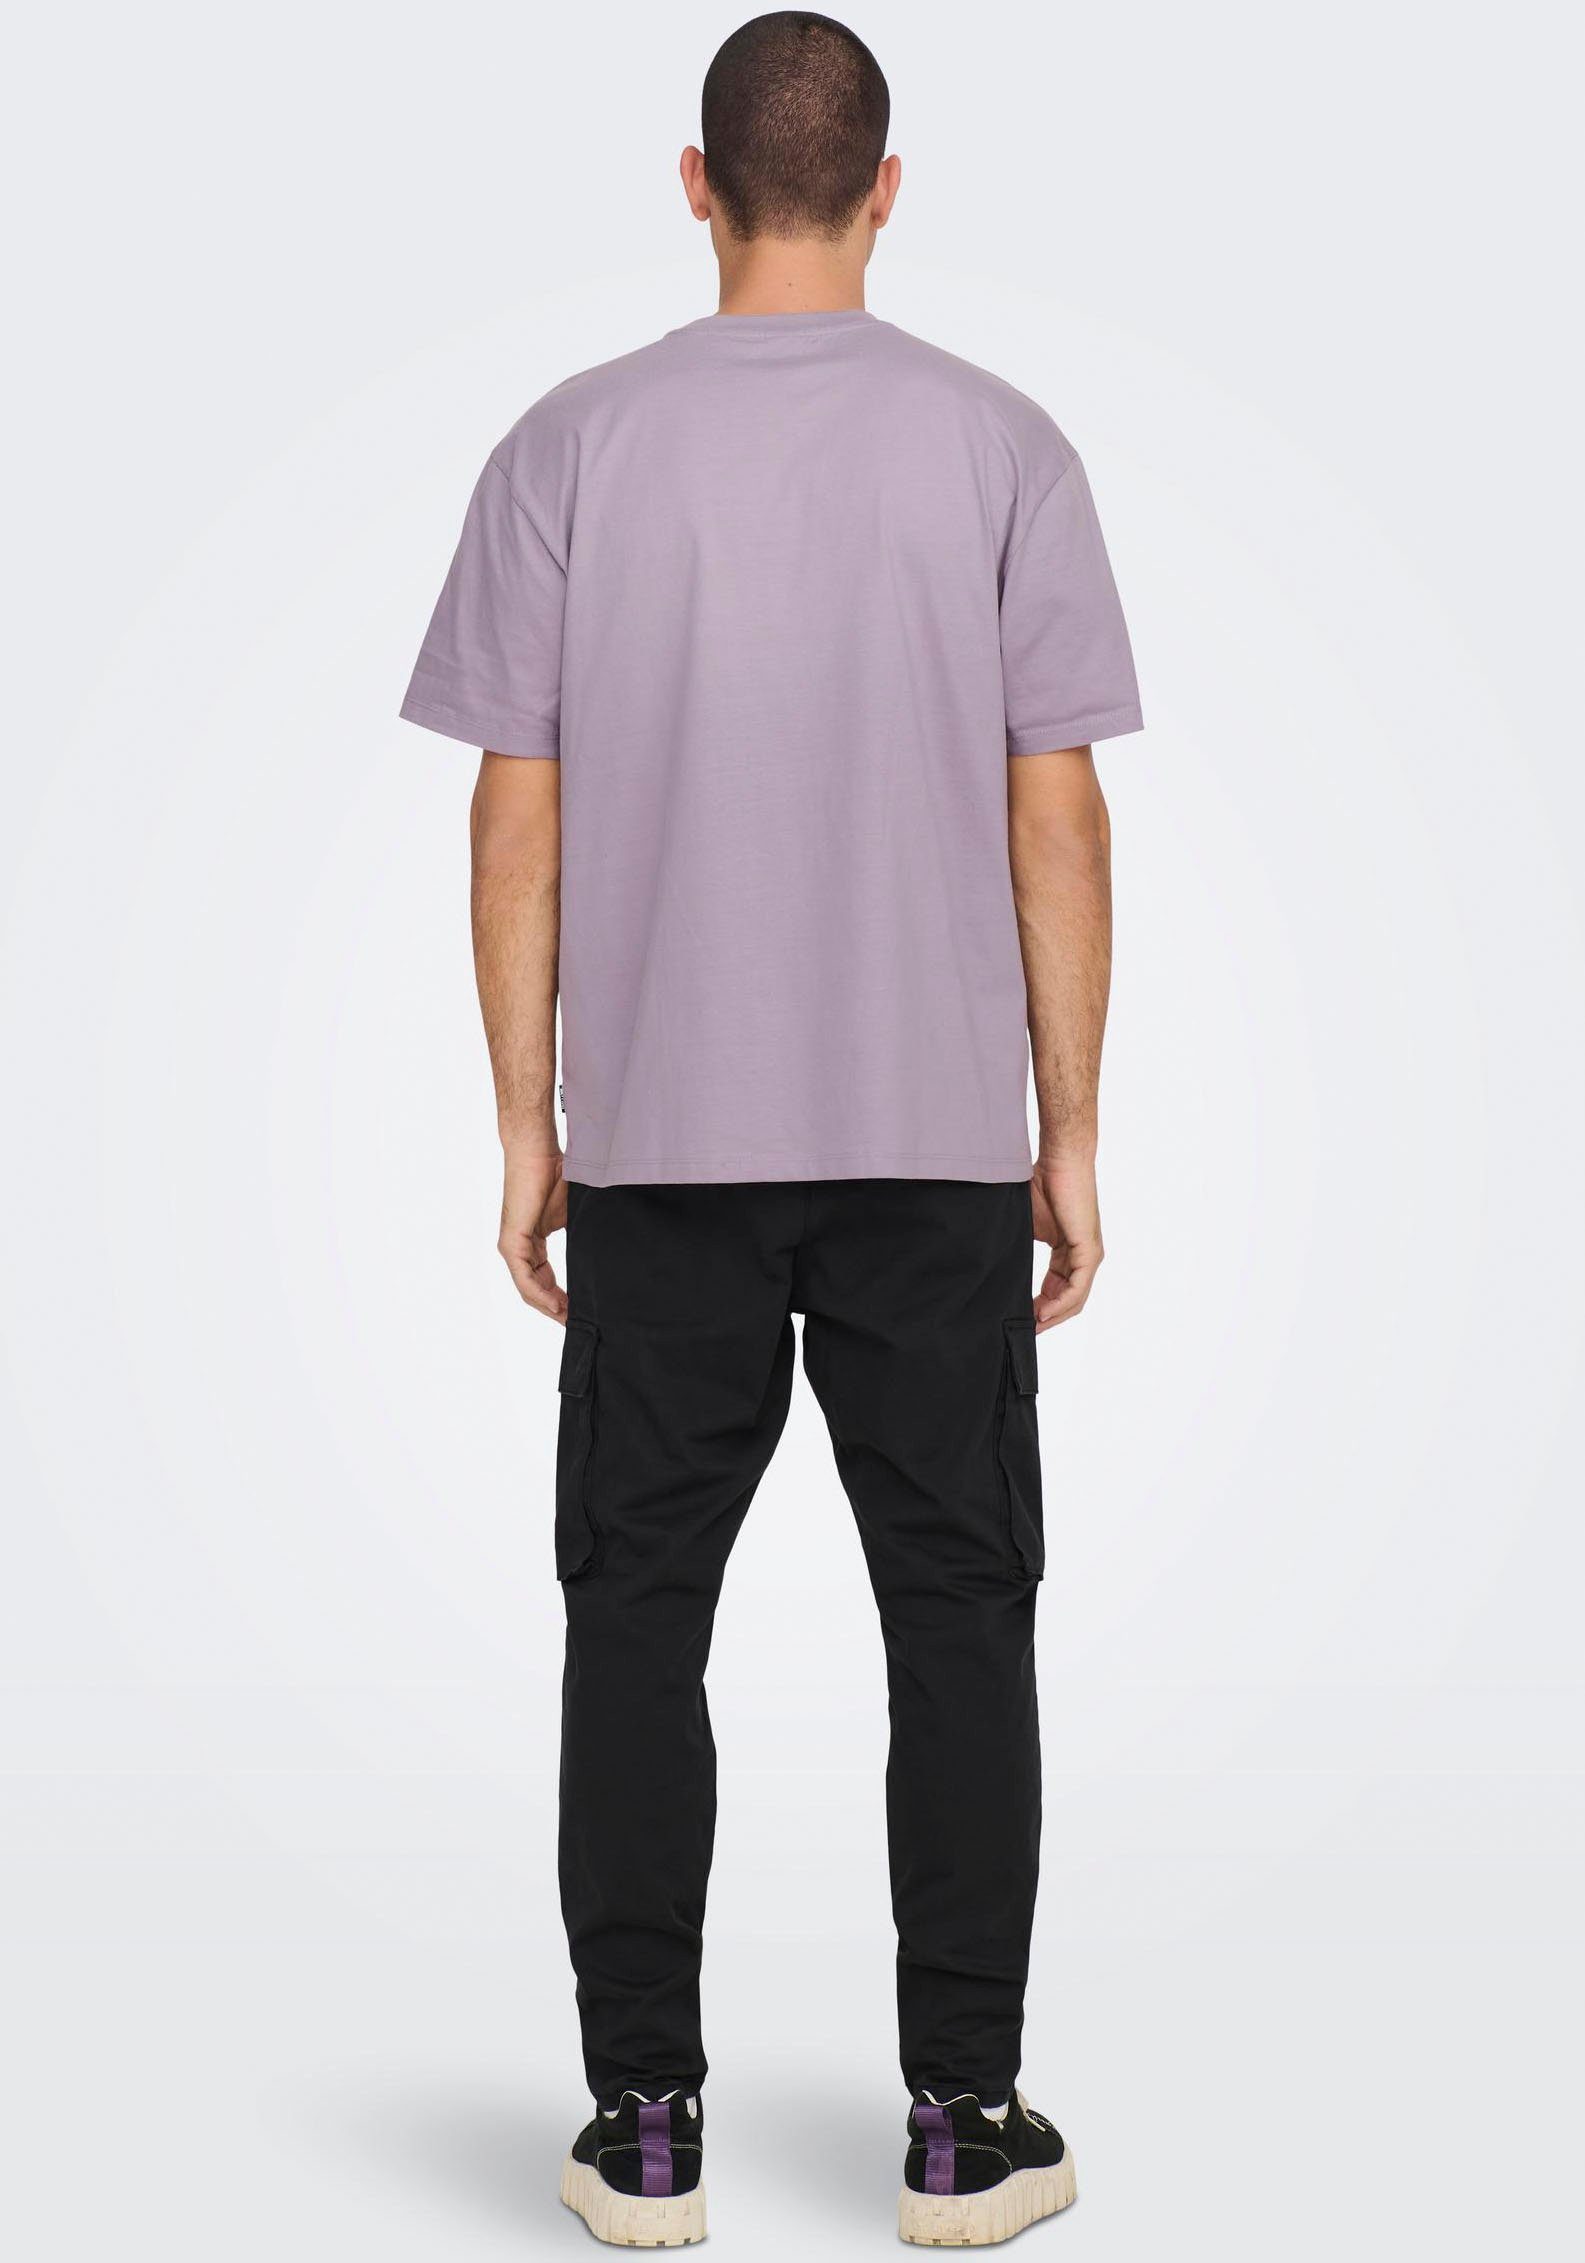 ash T-Shirt purple ONLY SONS & FRED